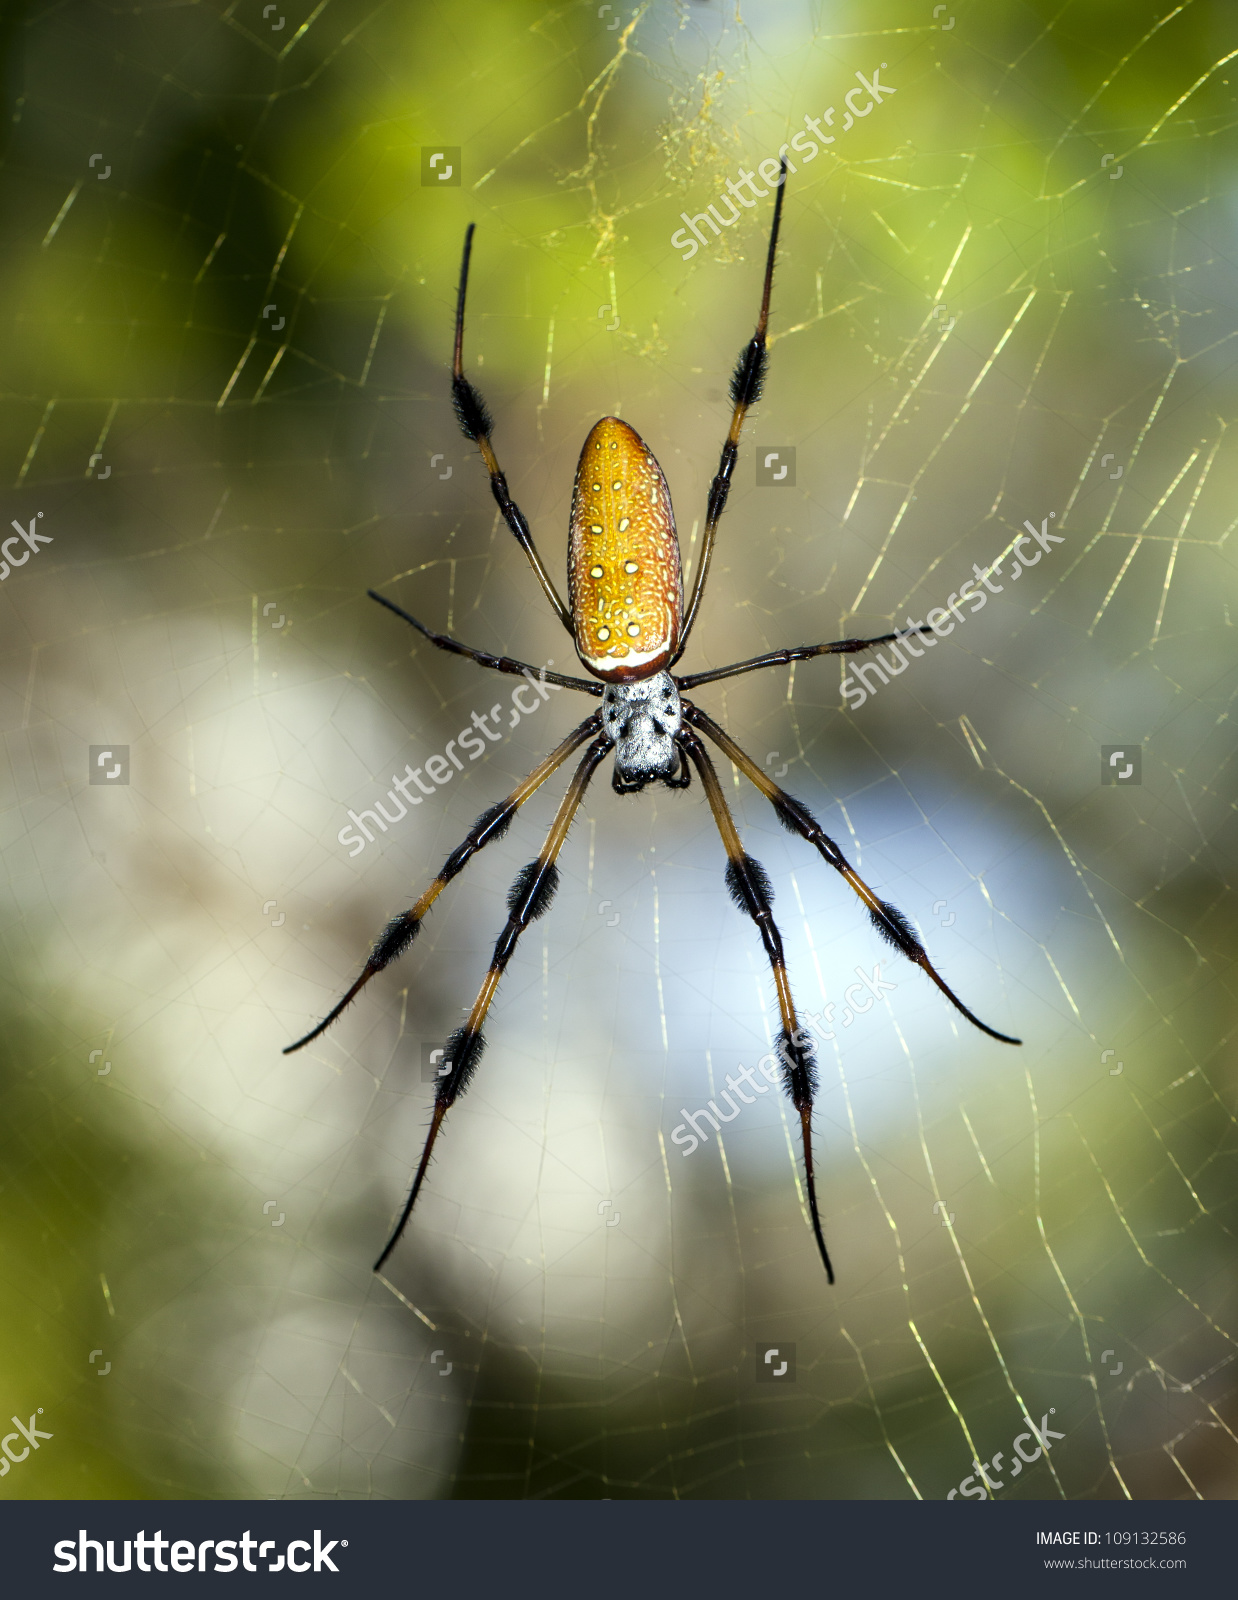 Golden Silk Orb-weaver Spider clipart #11, Download drawings